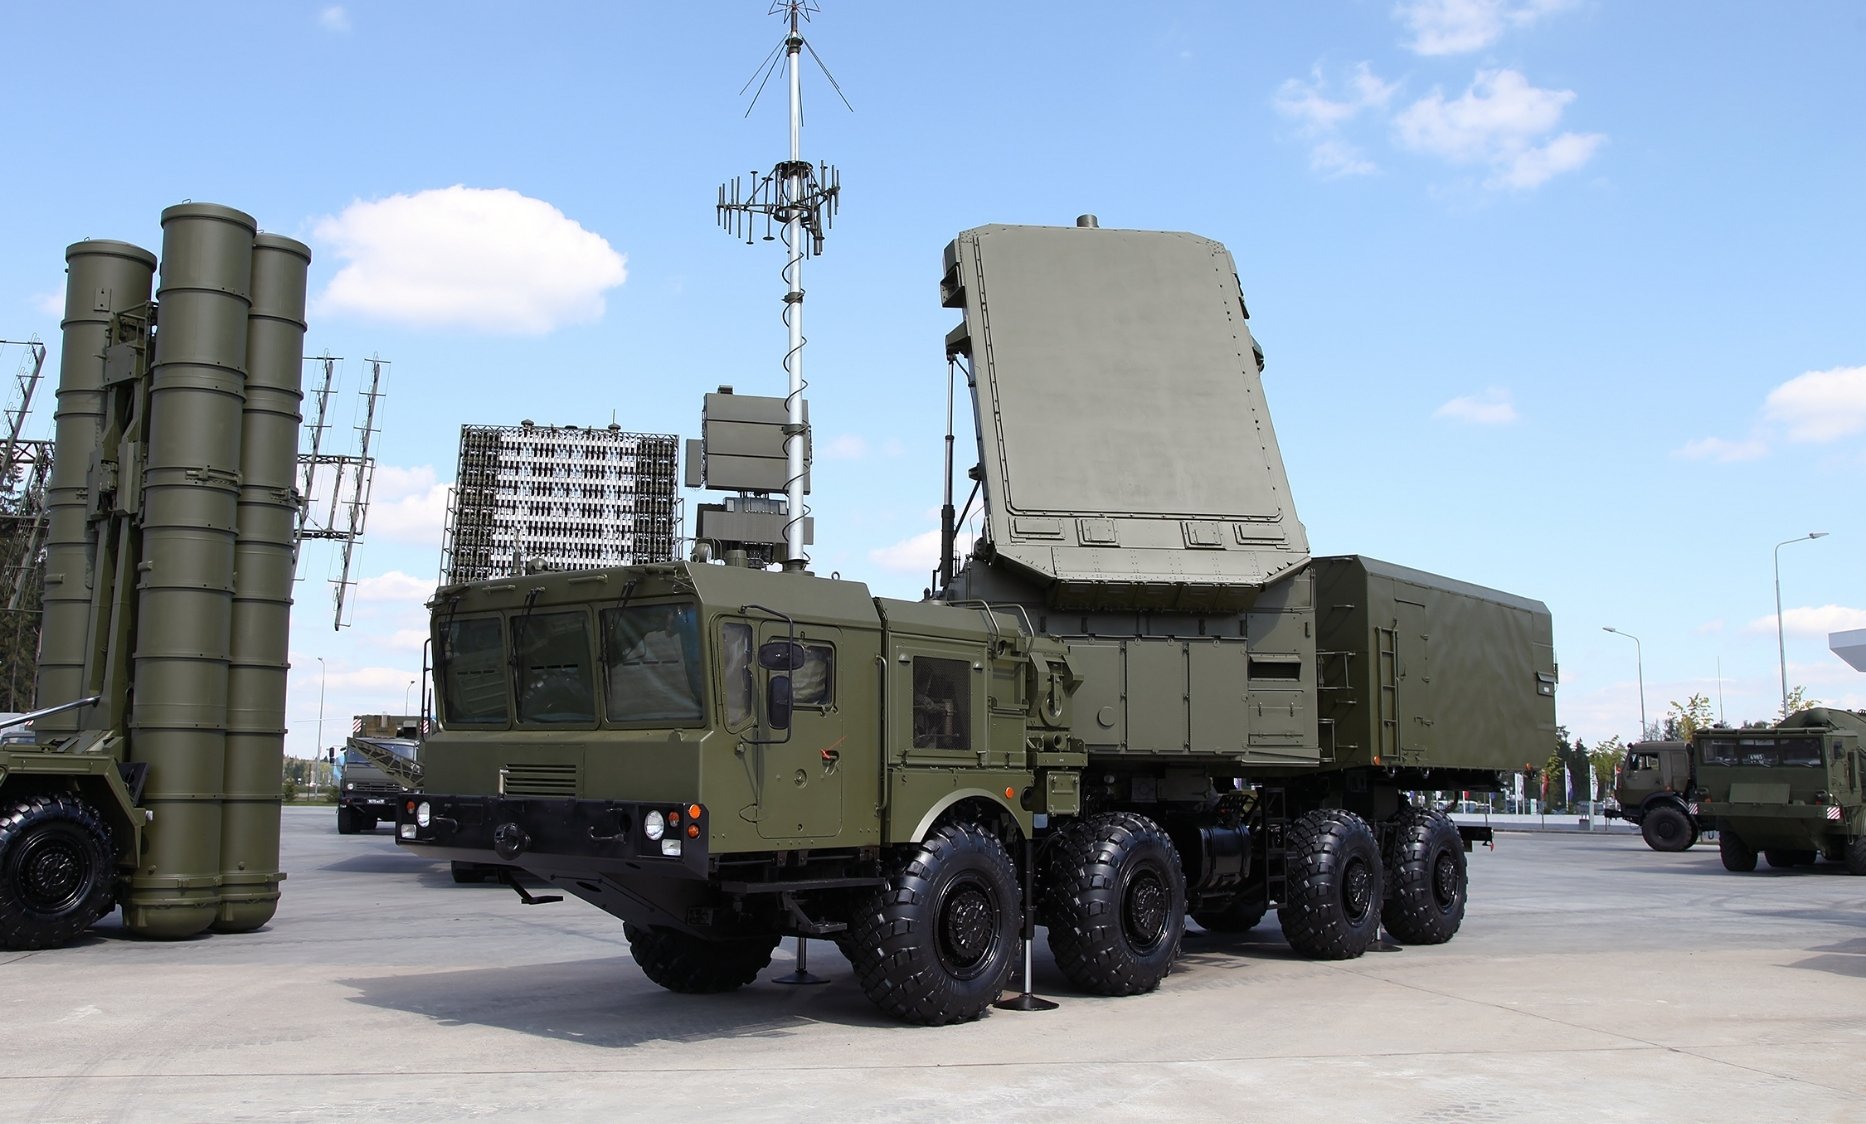 S400 Russian Missile Features 